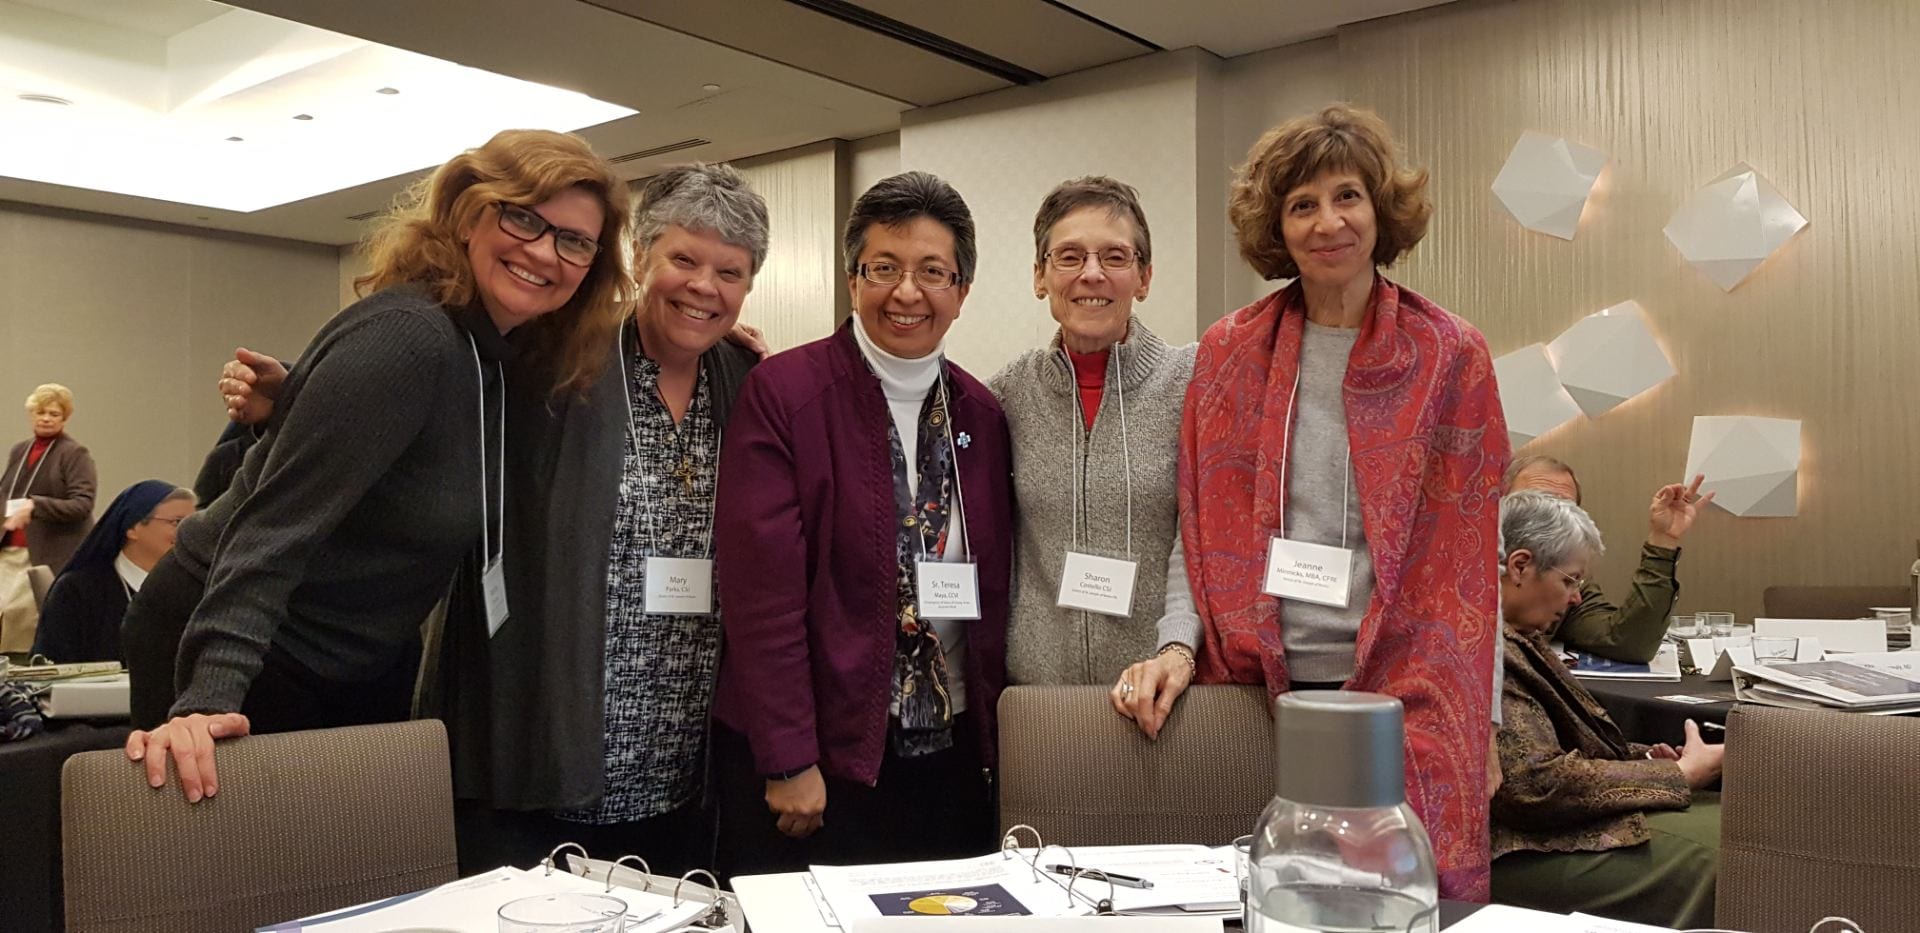 Sister Sharon Costello, second from right, with the Sisters of St. Joseph team and Sisters of Charity of the Incarnate Word team, at the initial workshop of Advancing Mission 2.0.